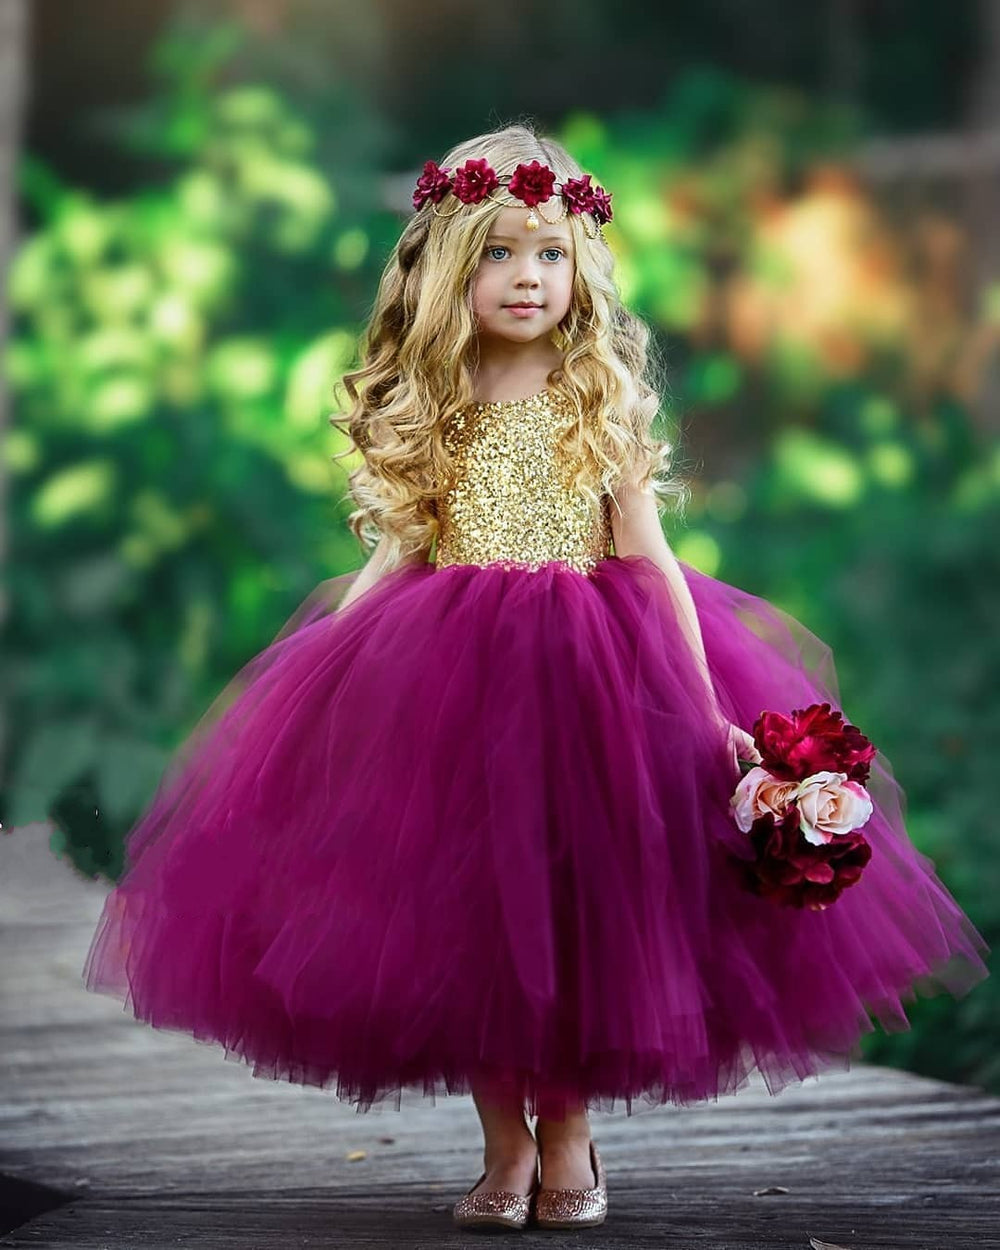 MB_152IVBUR - Flower Girl Dress Style 152-Choice of White or Ivory Dress  with Burgundy Sash and Petals - Infants and Toddler Dresses - Flower Girl  Dresses - Flower Girl Dress For Less